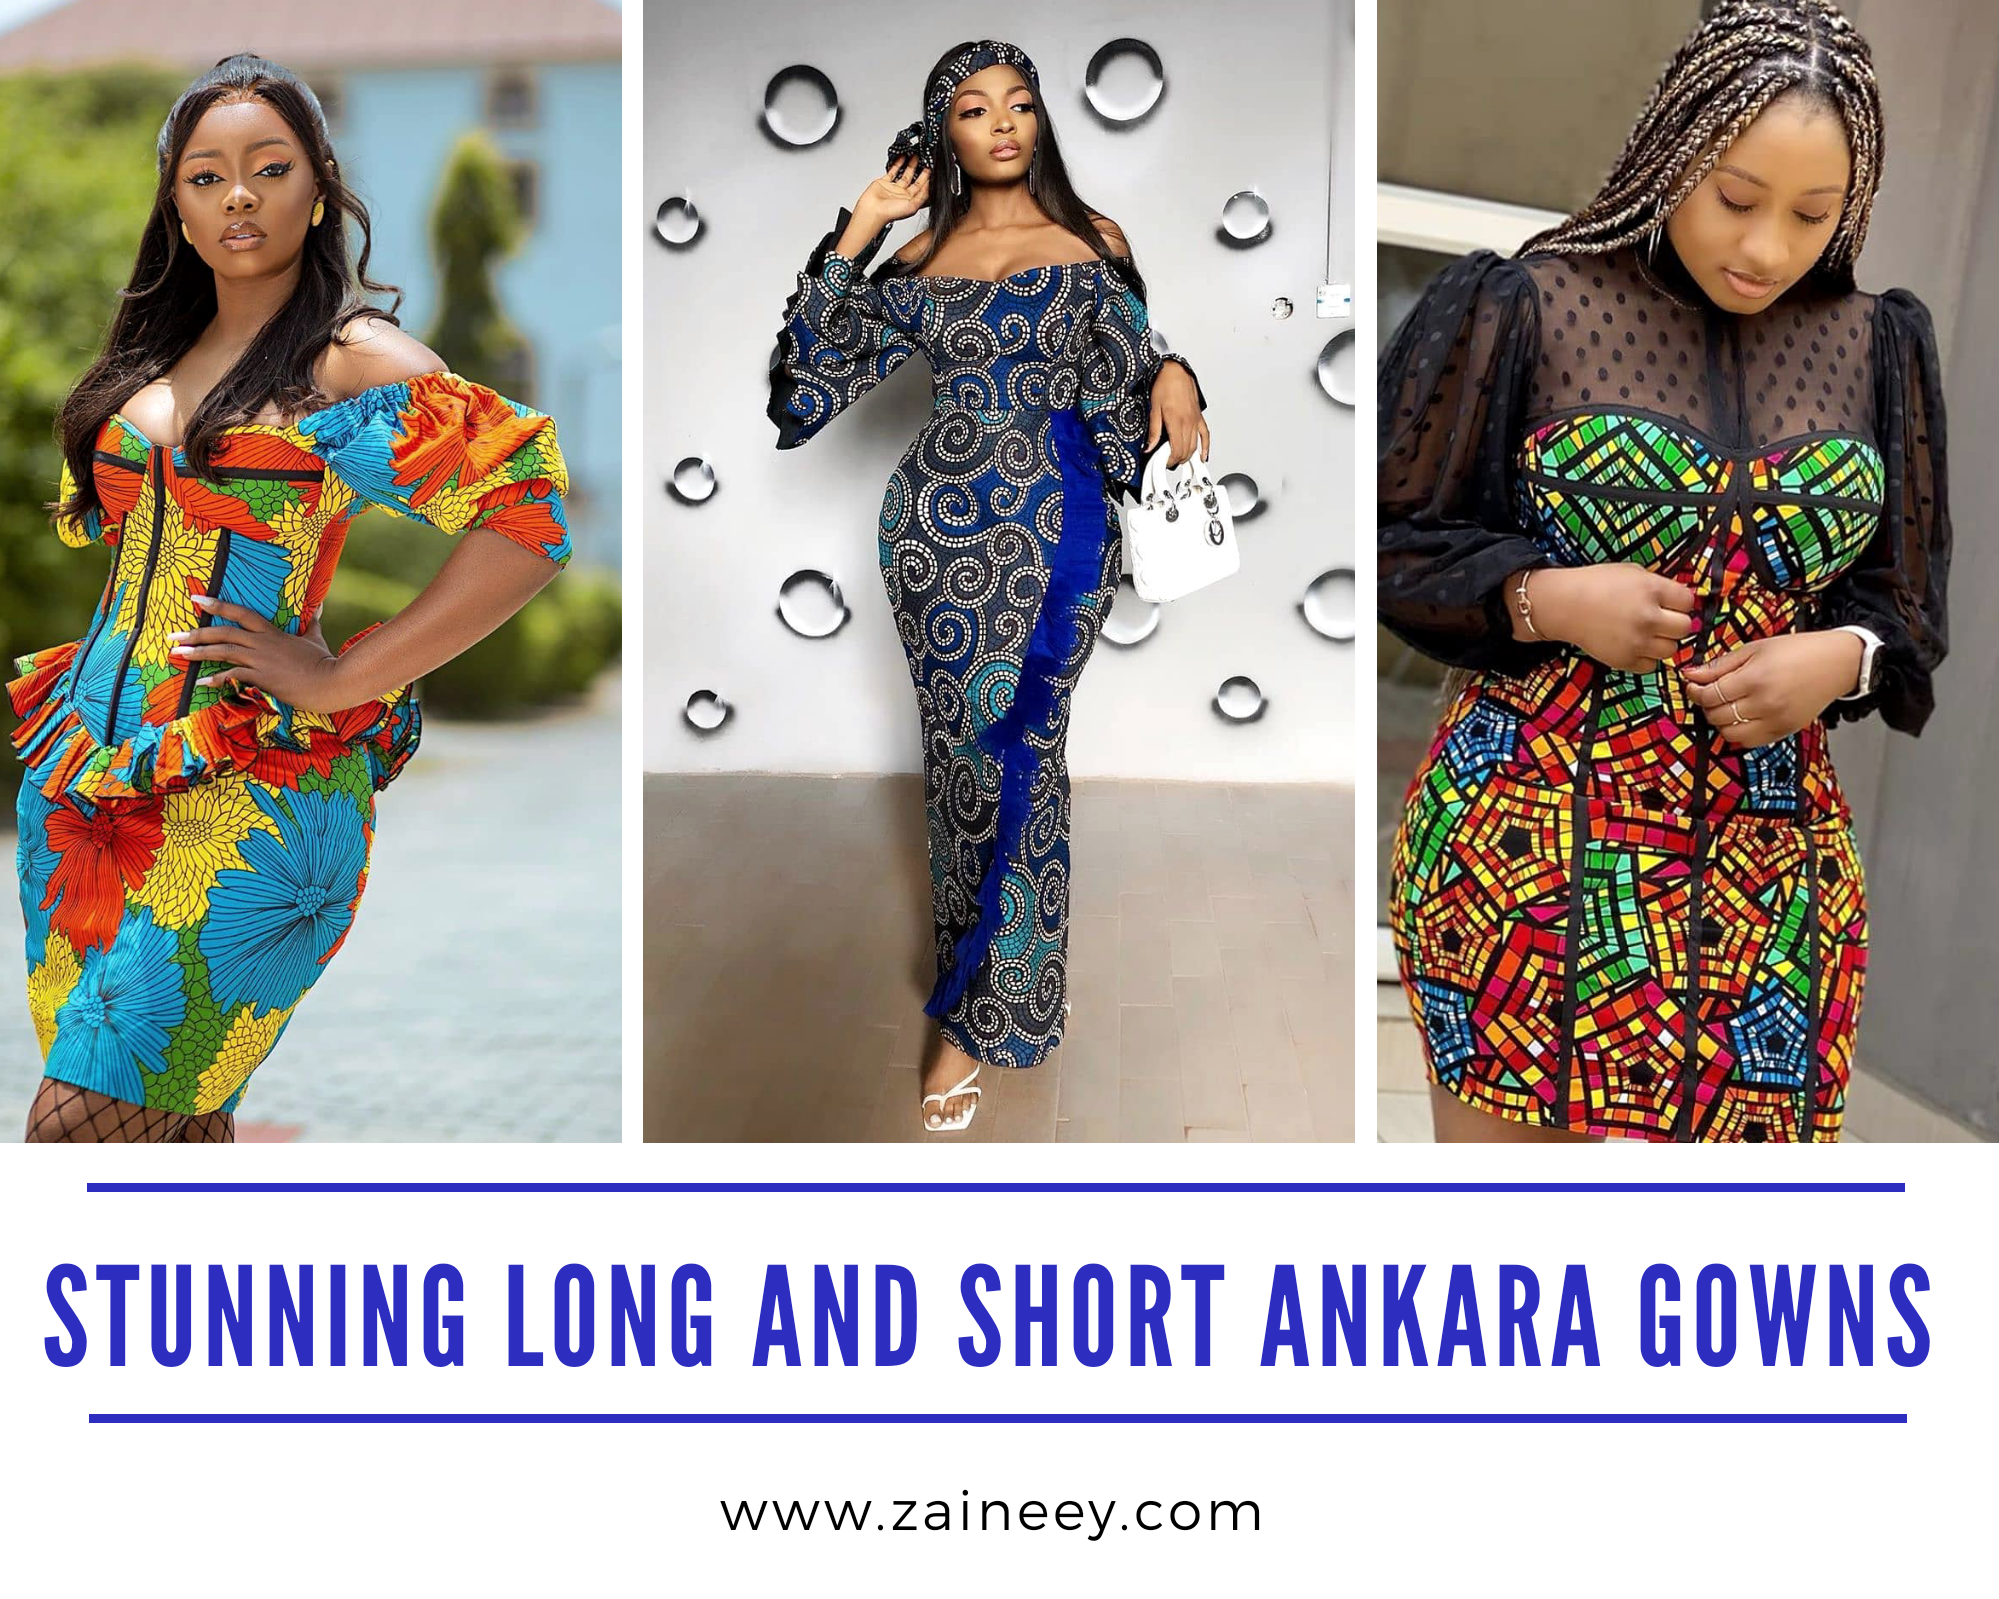 Ankara Gowns - Latest, Trendy, and Stunning long and short Ankara Gowns for Ladies